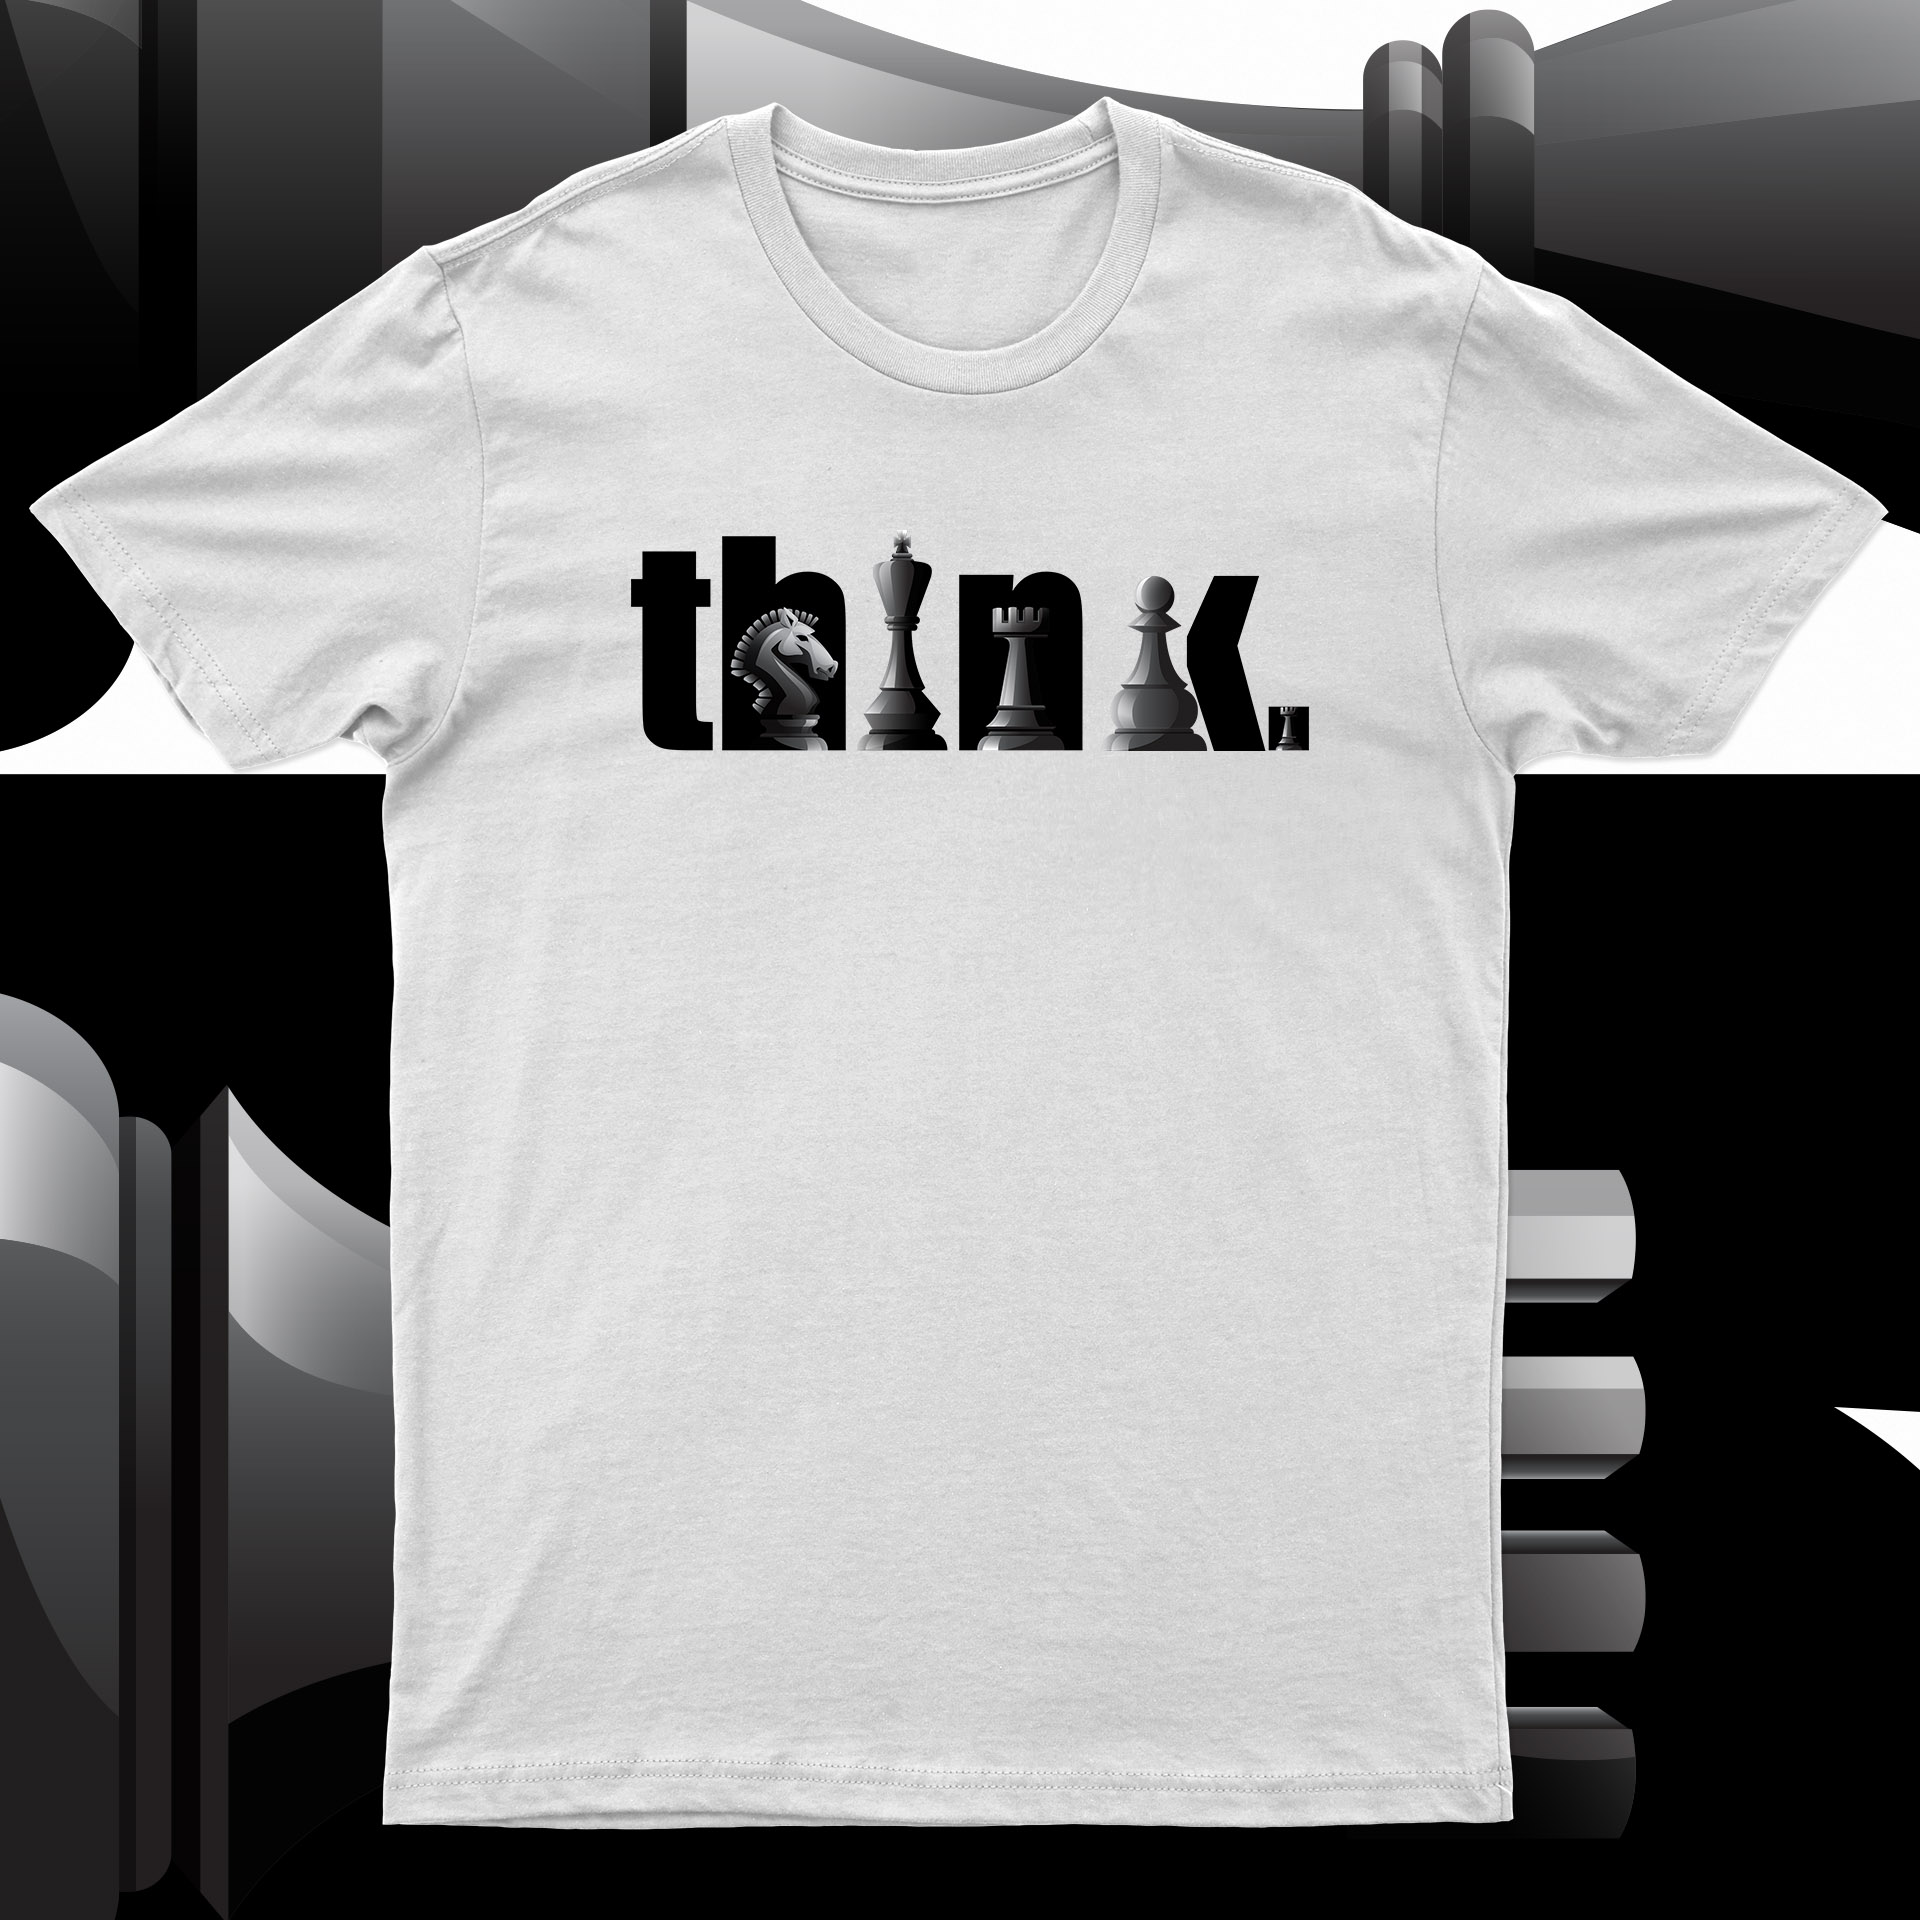 Chess Think | Cool T-Shirt Design For Sale!! - Buy t-shirt designs